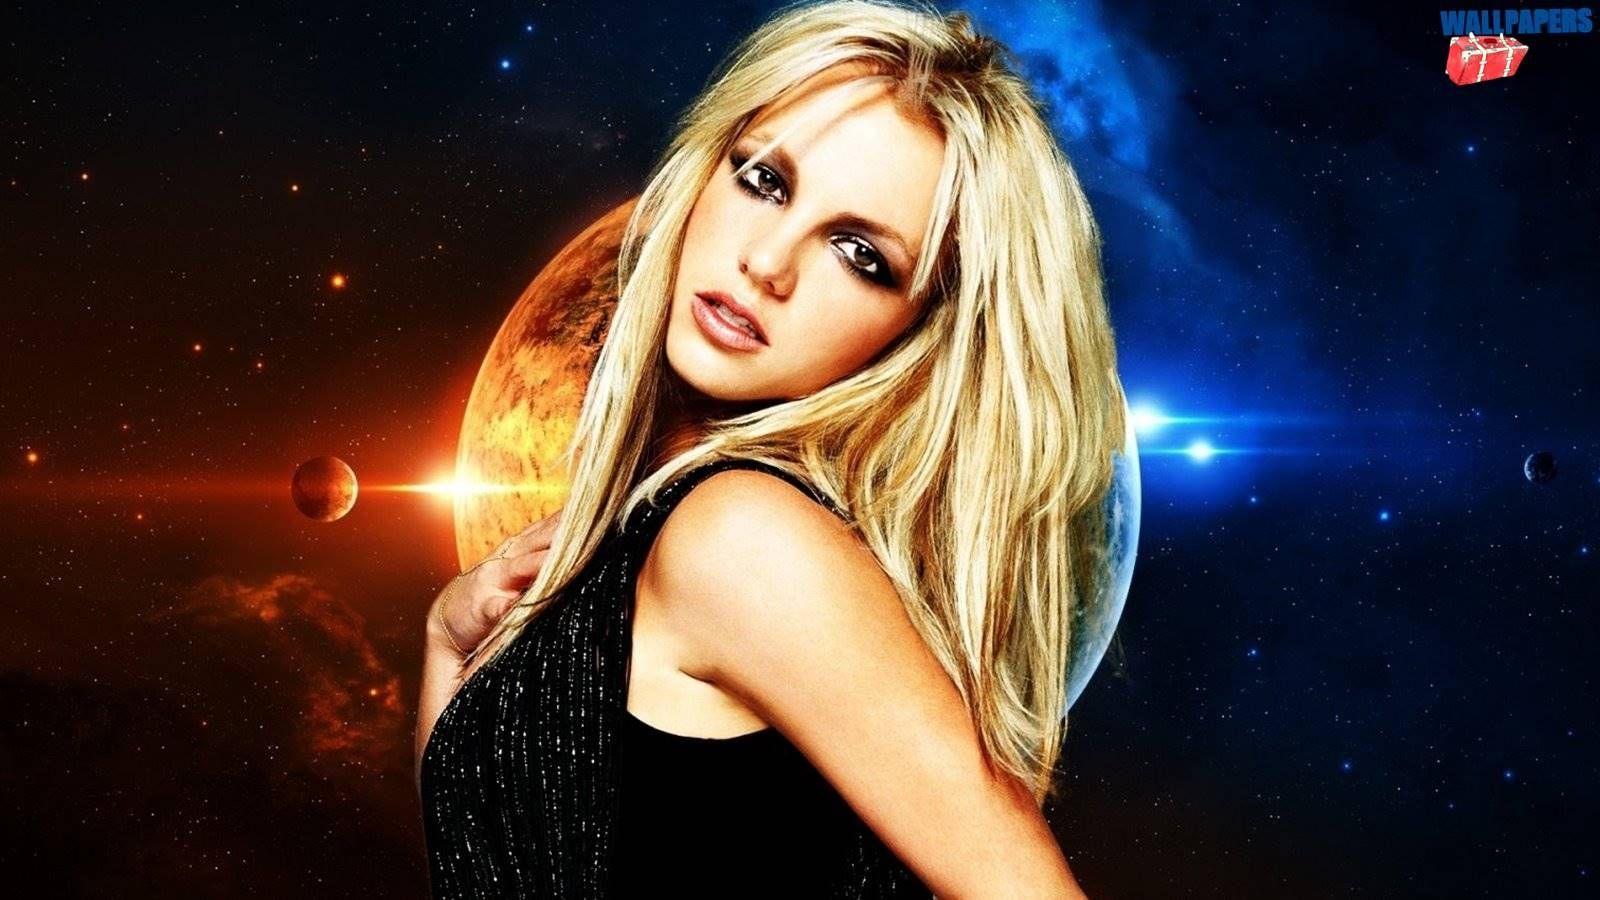 Britney Spears 2018 Wallpapers - Wallpaper Cave